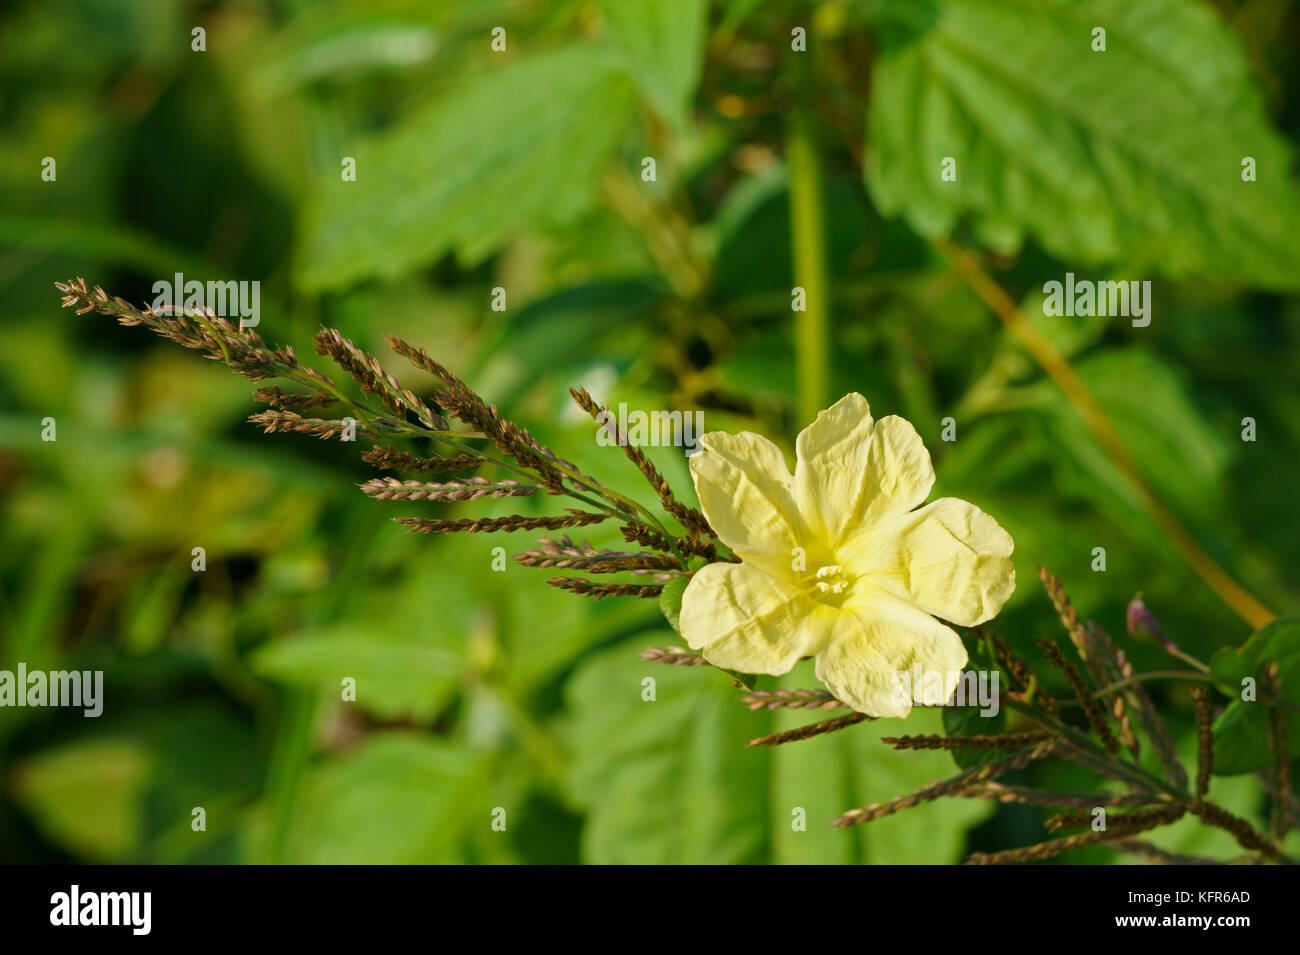 Yellow flower on green leaves, Merremia hederacea Stock Photo